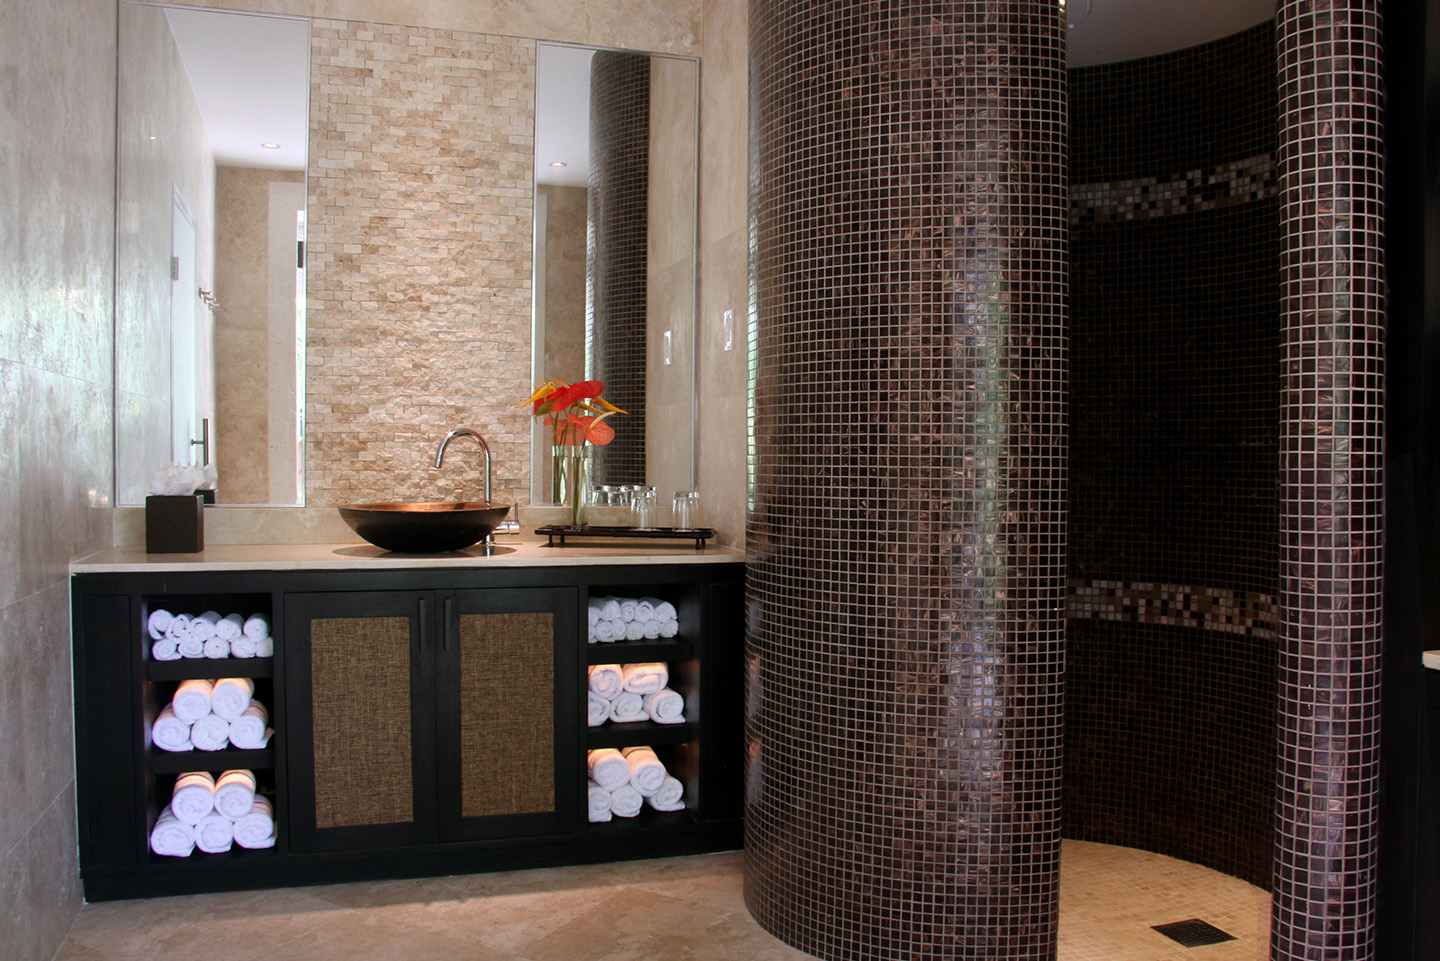 Coral Reef Club - The Spa